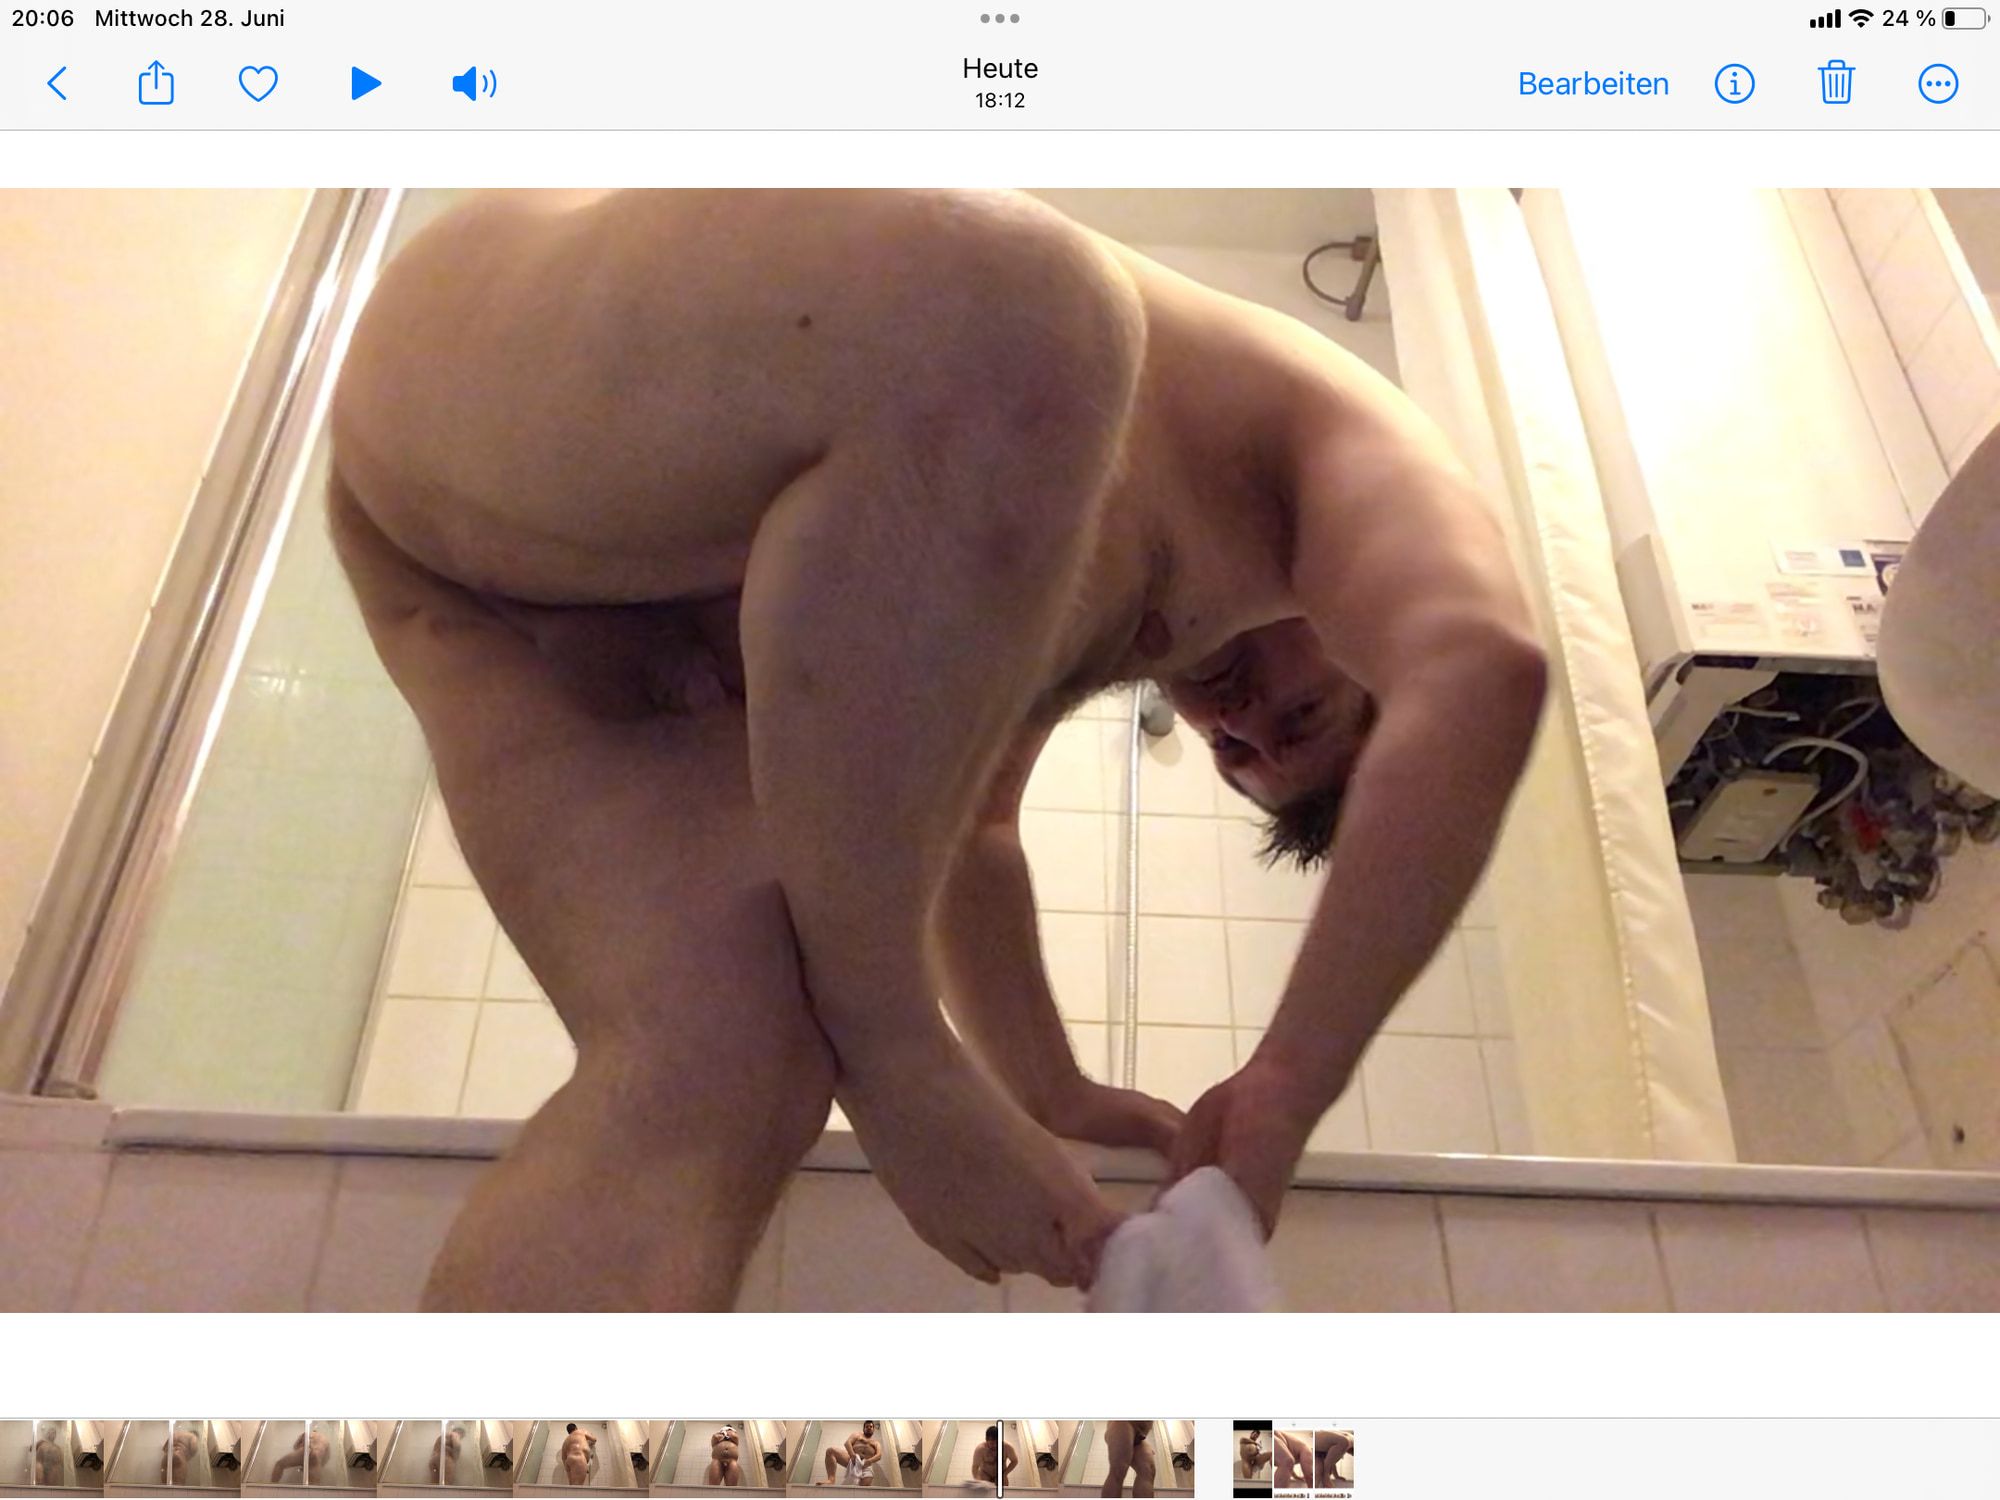 No privacy - Loser exposed showering by teen princess